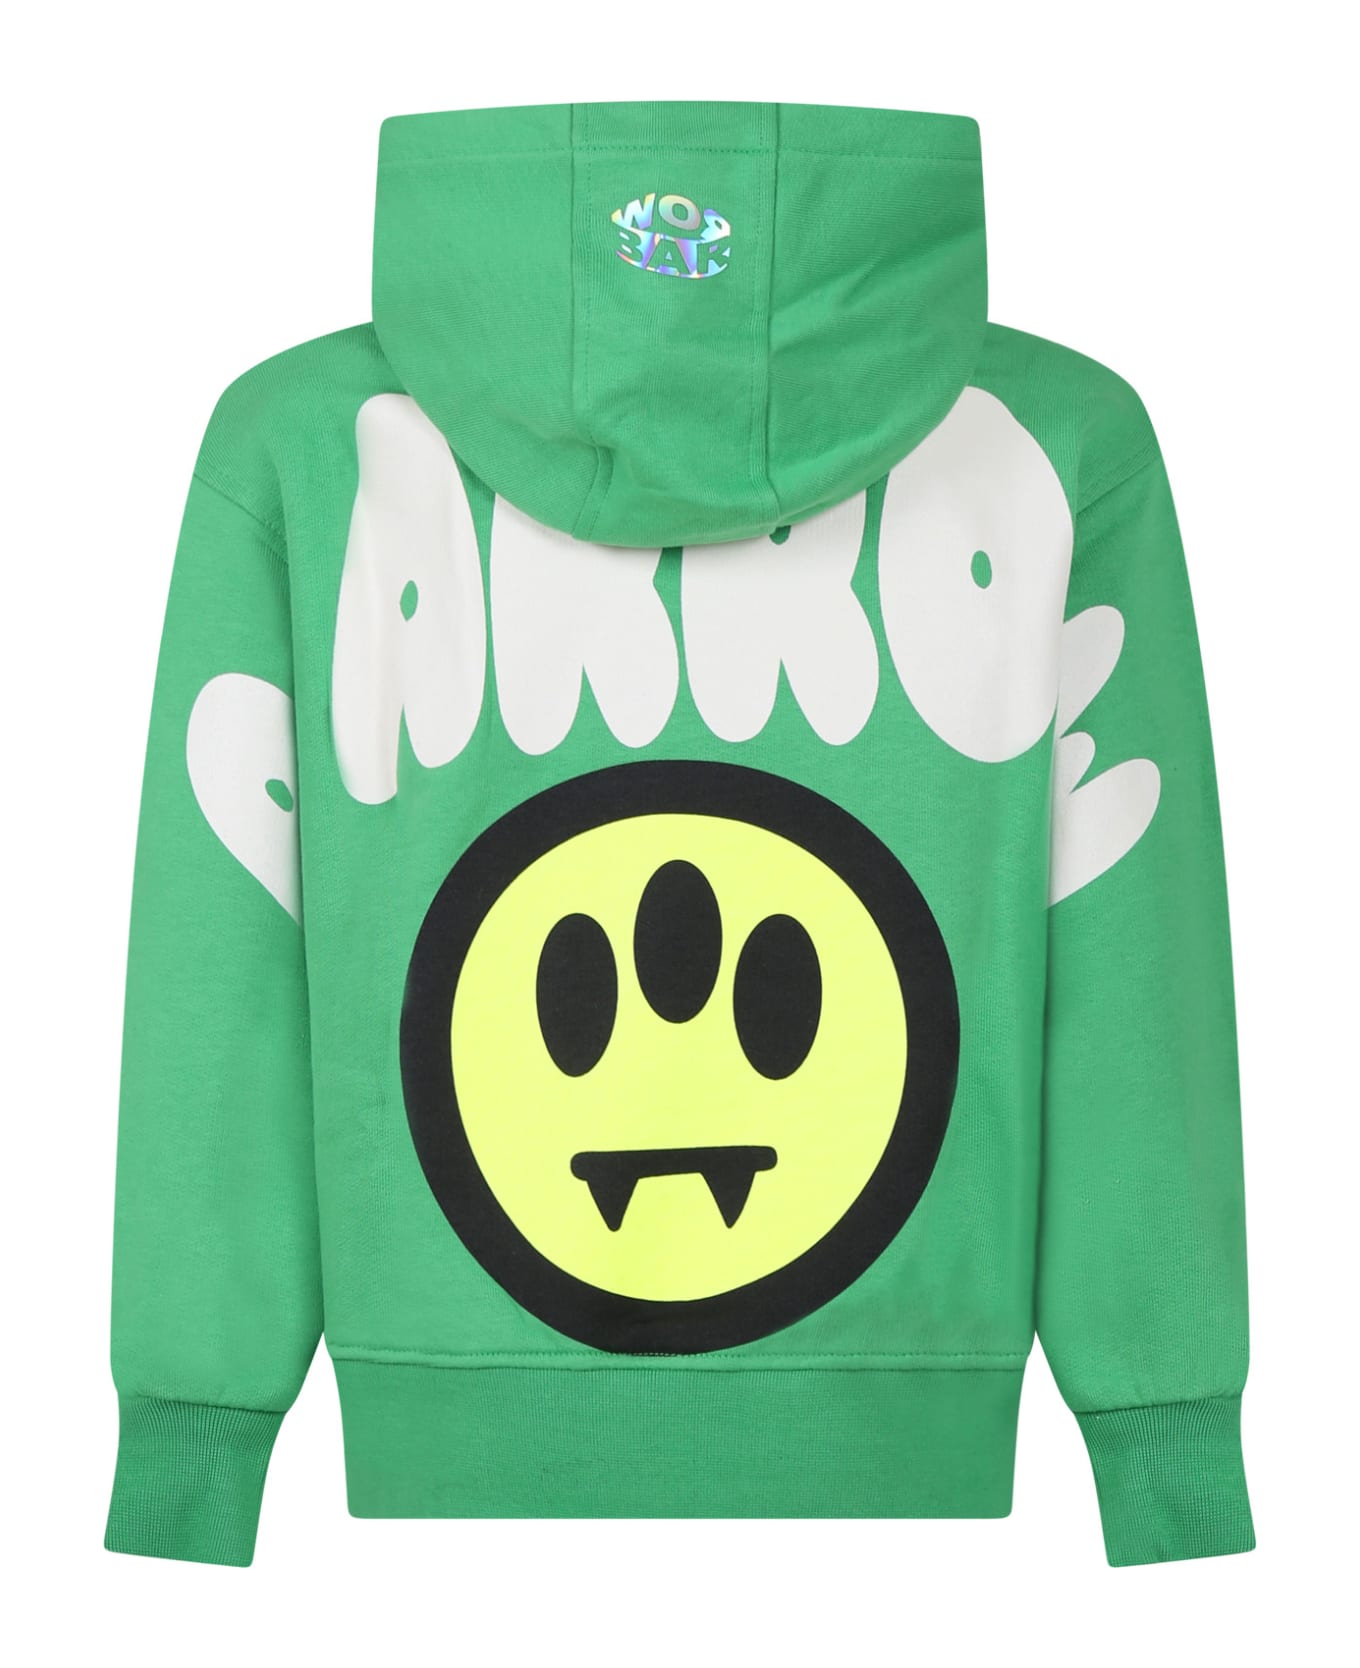 Barrow Green Sweatshirt For Kids With Logo And Iconic Smiley Face - Fern Green